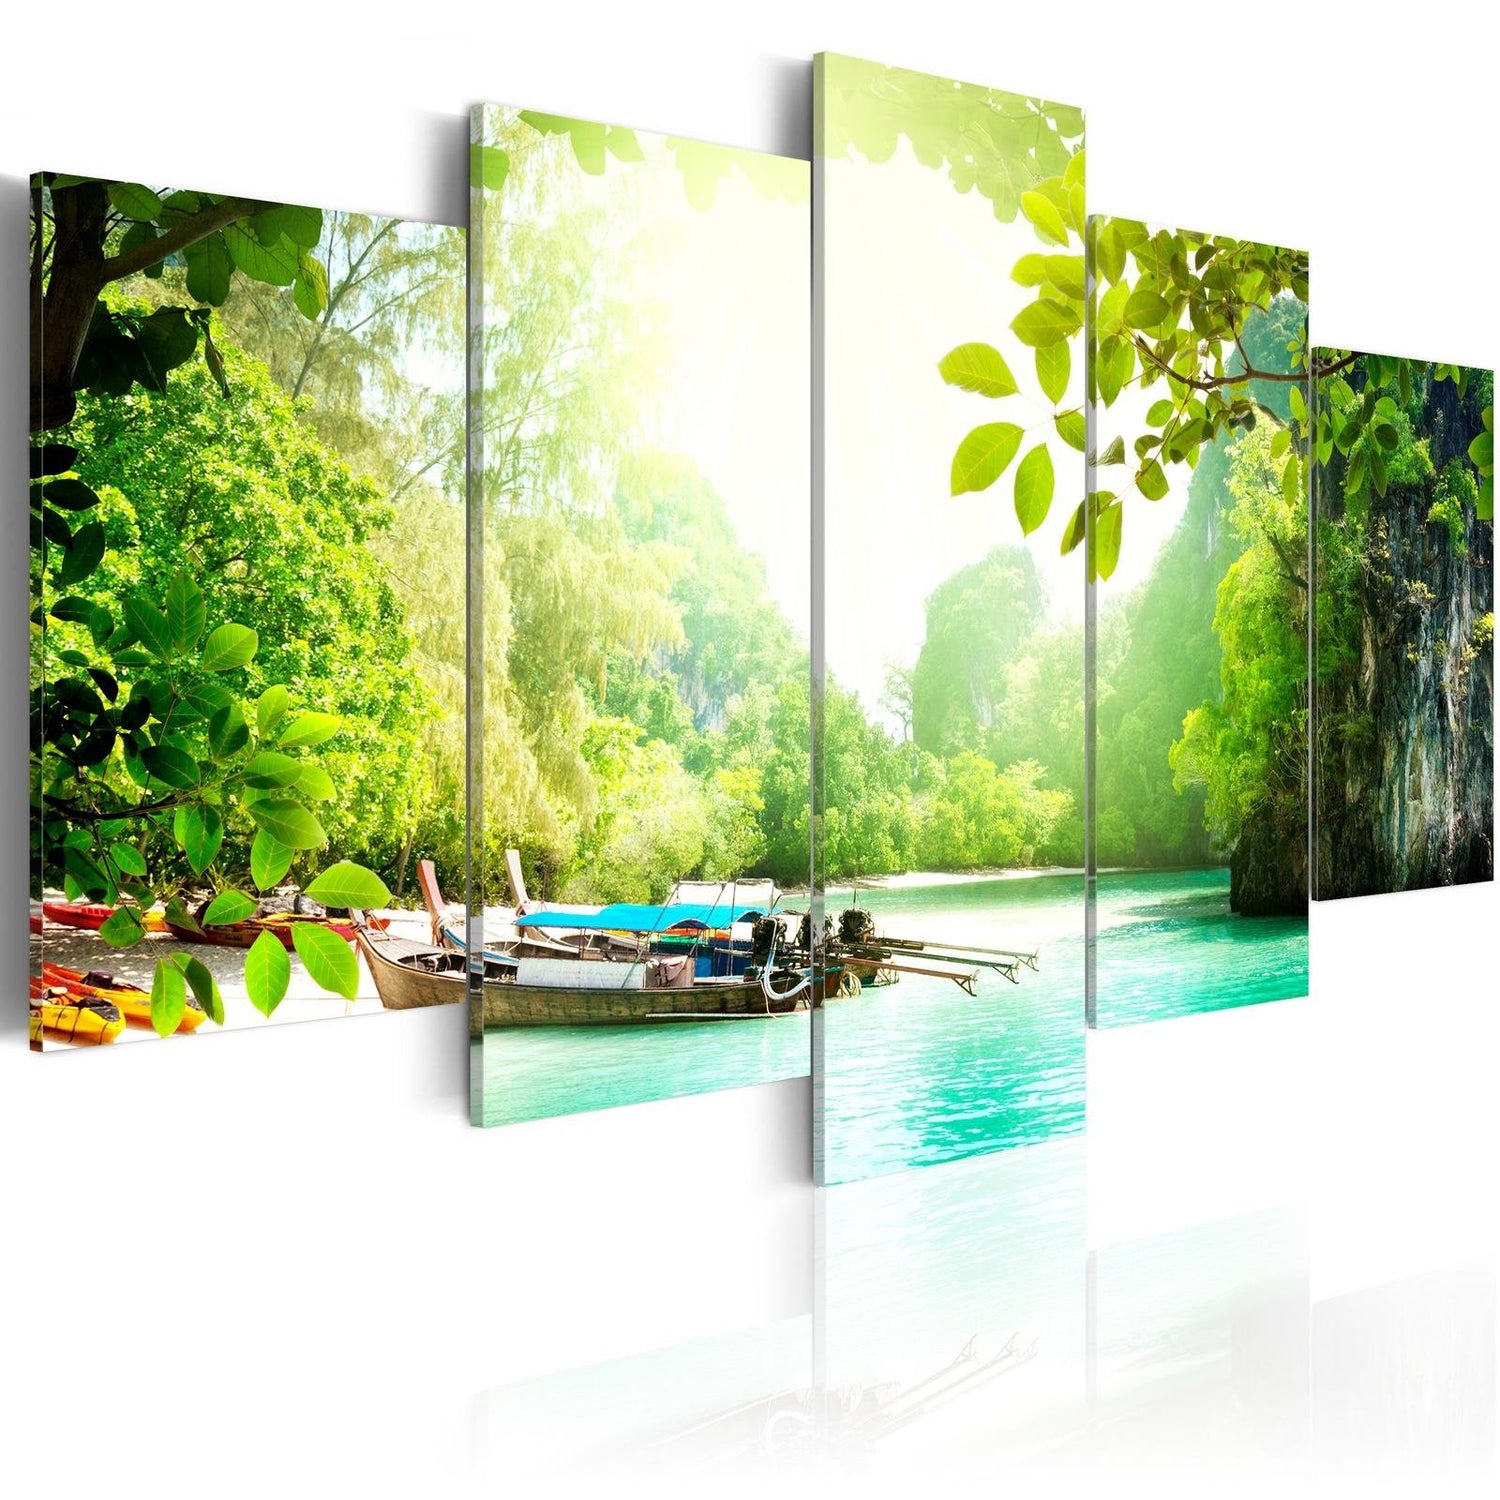 Stretched Canvas Landscape Art - Under The Cover Of Trees-Tiptophomedecor